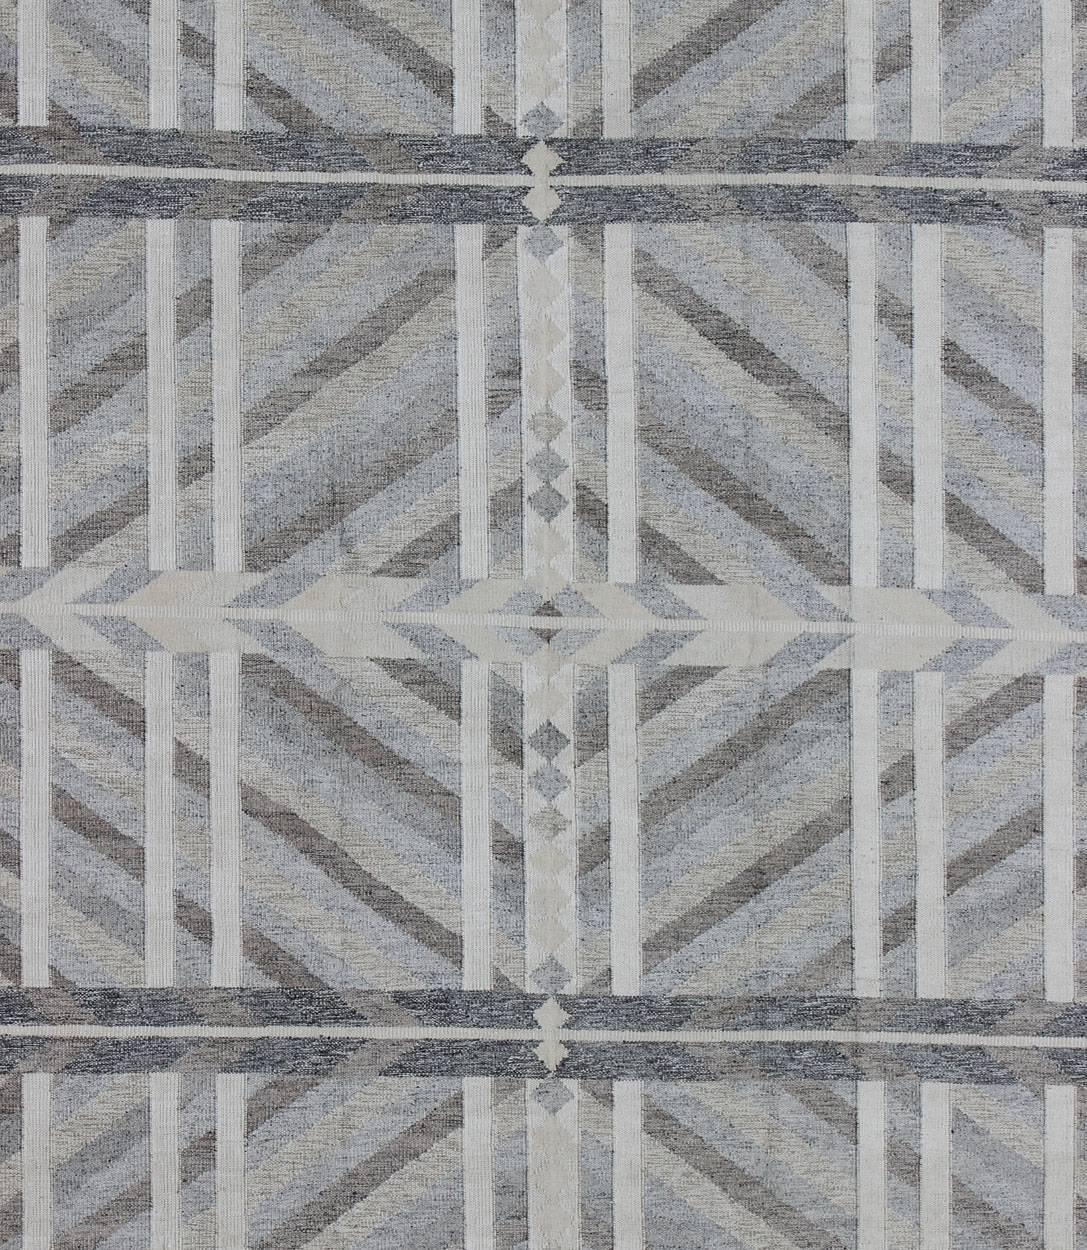 Large Modern Scandinavian/Swedish Geometric Rug in Gray and Pastel Colors.
This large Scandinavian flat-weave rug is inspired by the work of Swedish textile designers of the early to mid-20th century. With a unique blend of historical and modern